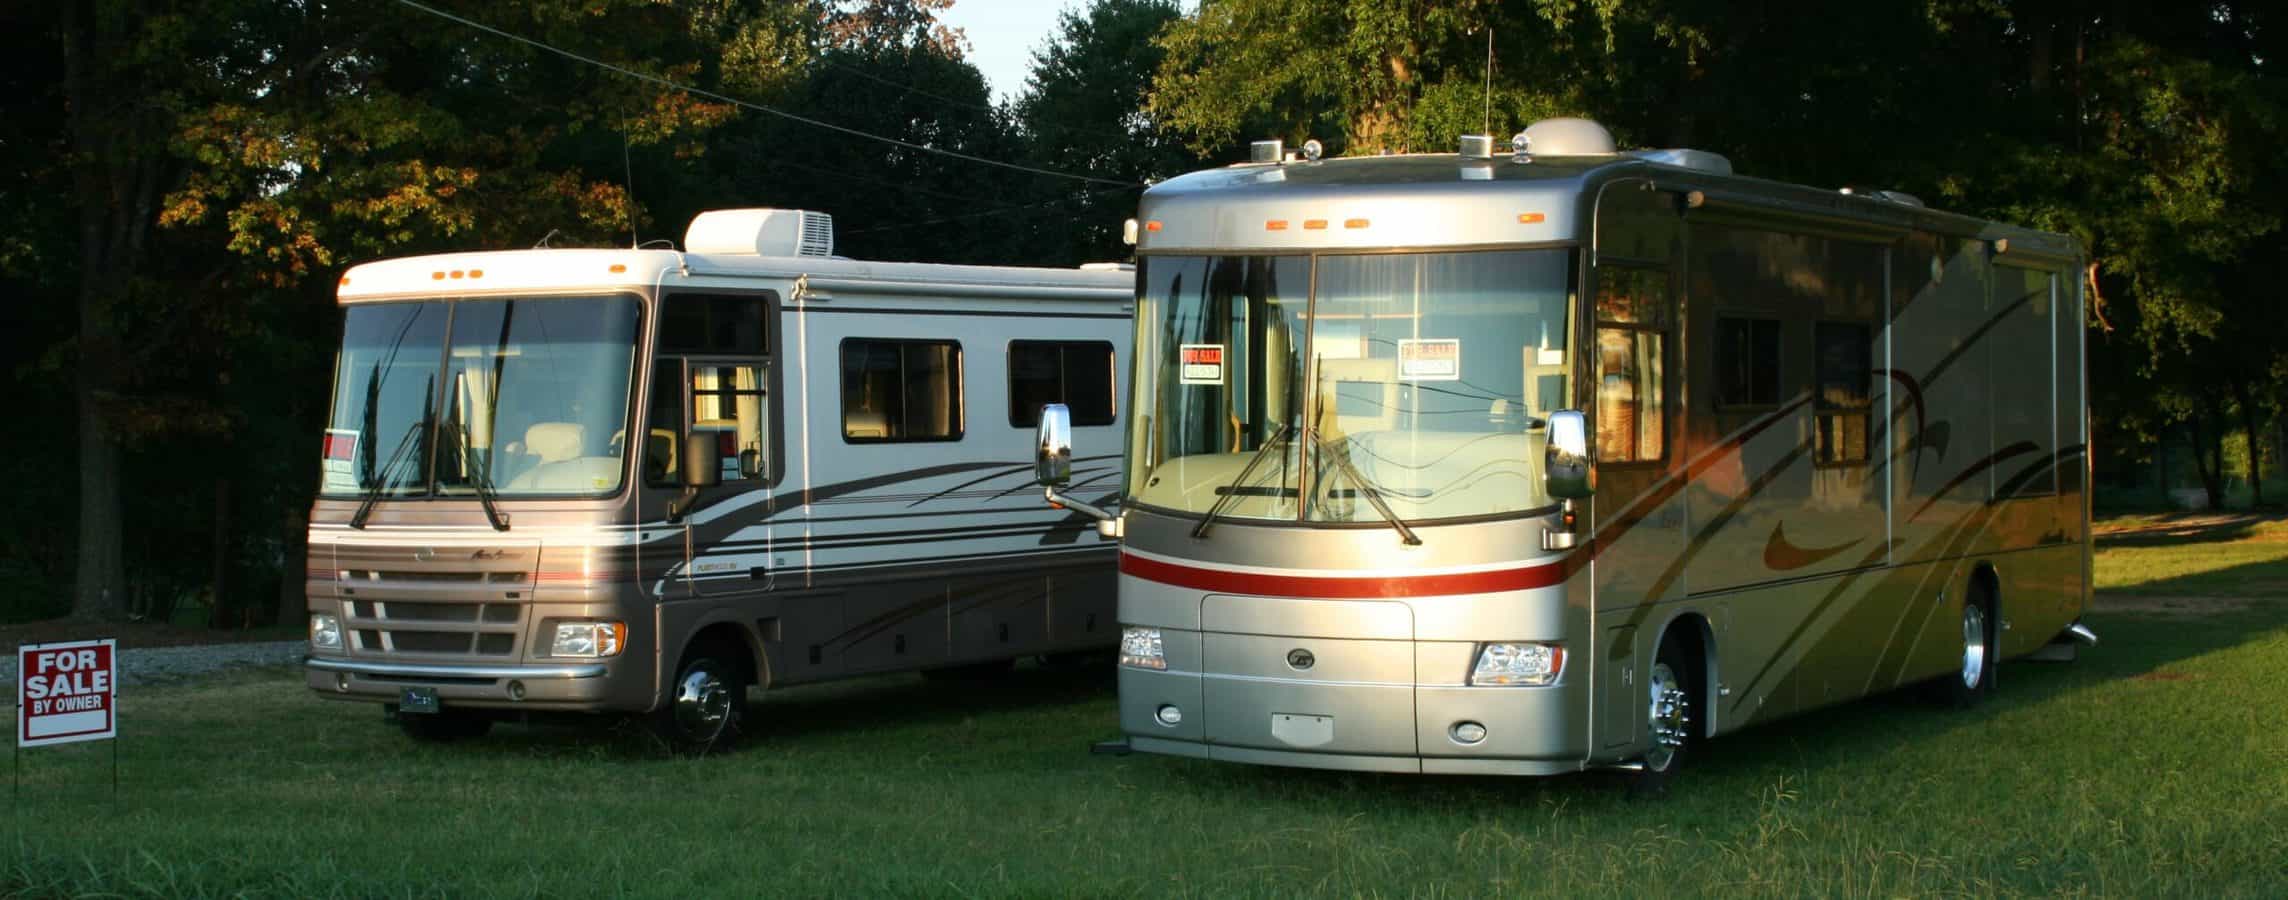 two motorhomes in yard listed for sale